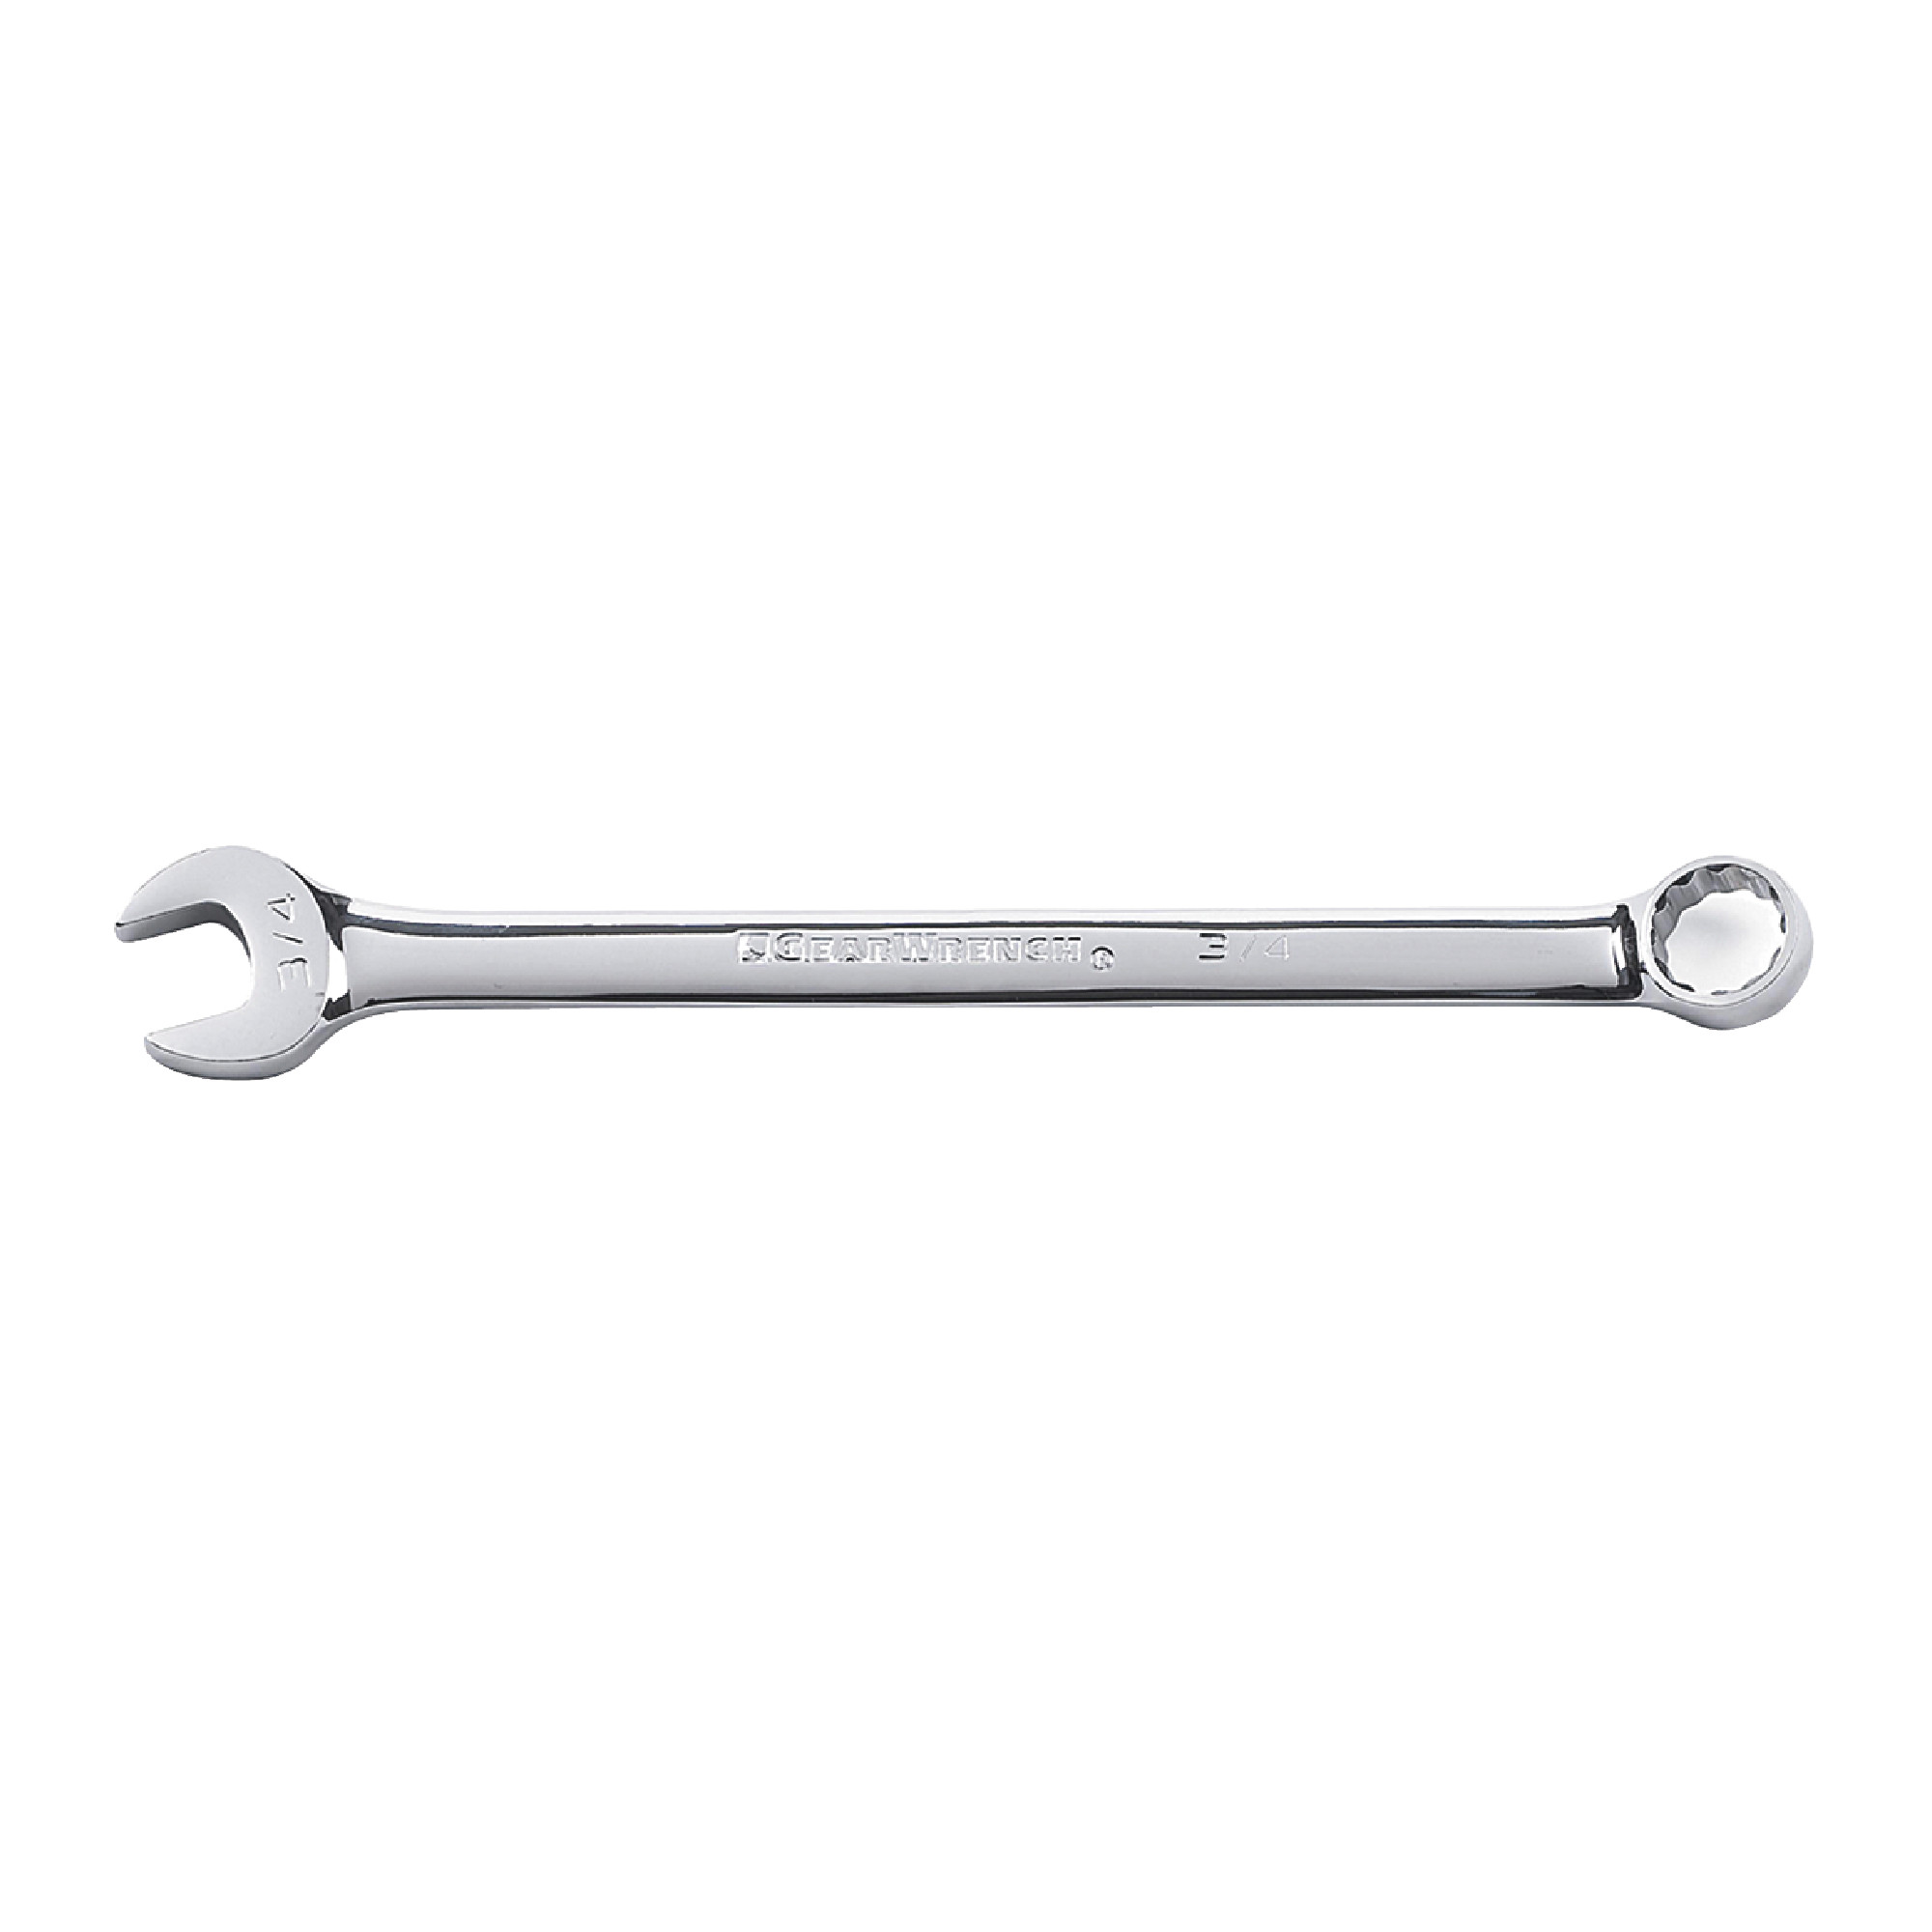 3/8" 12 Point Long Pattern Combination Wrench